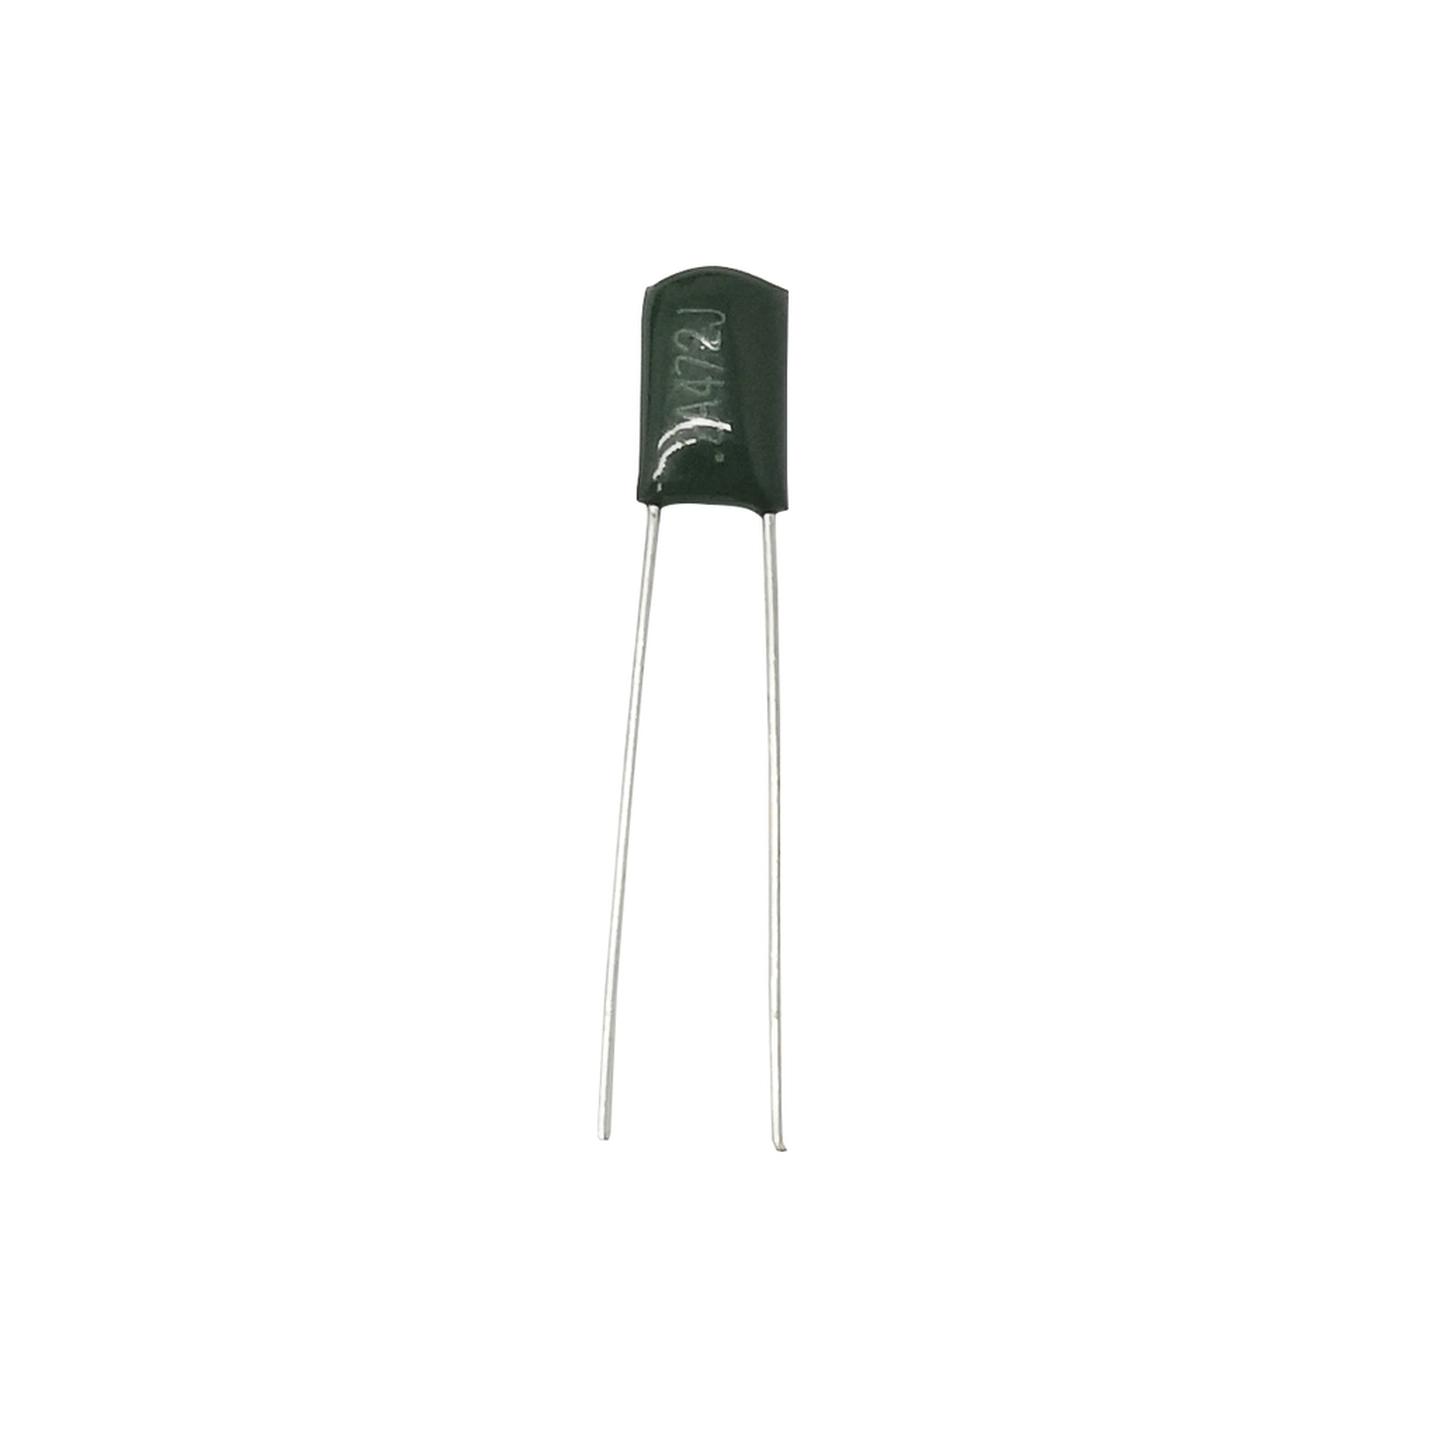 4.7nF 100VDC Polyester Capacitor